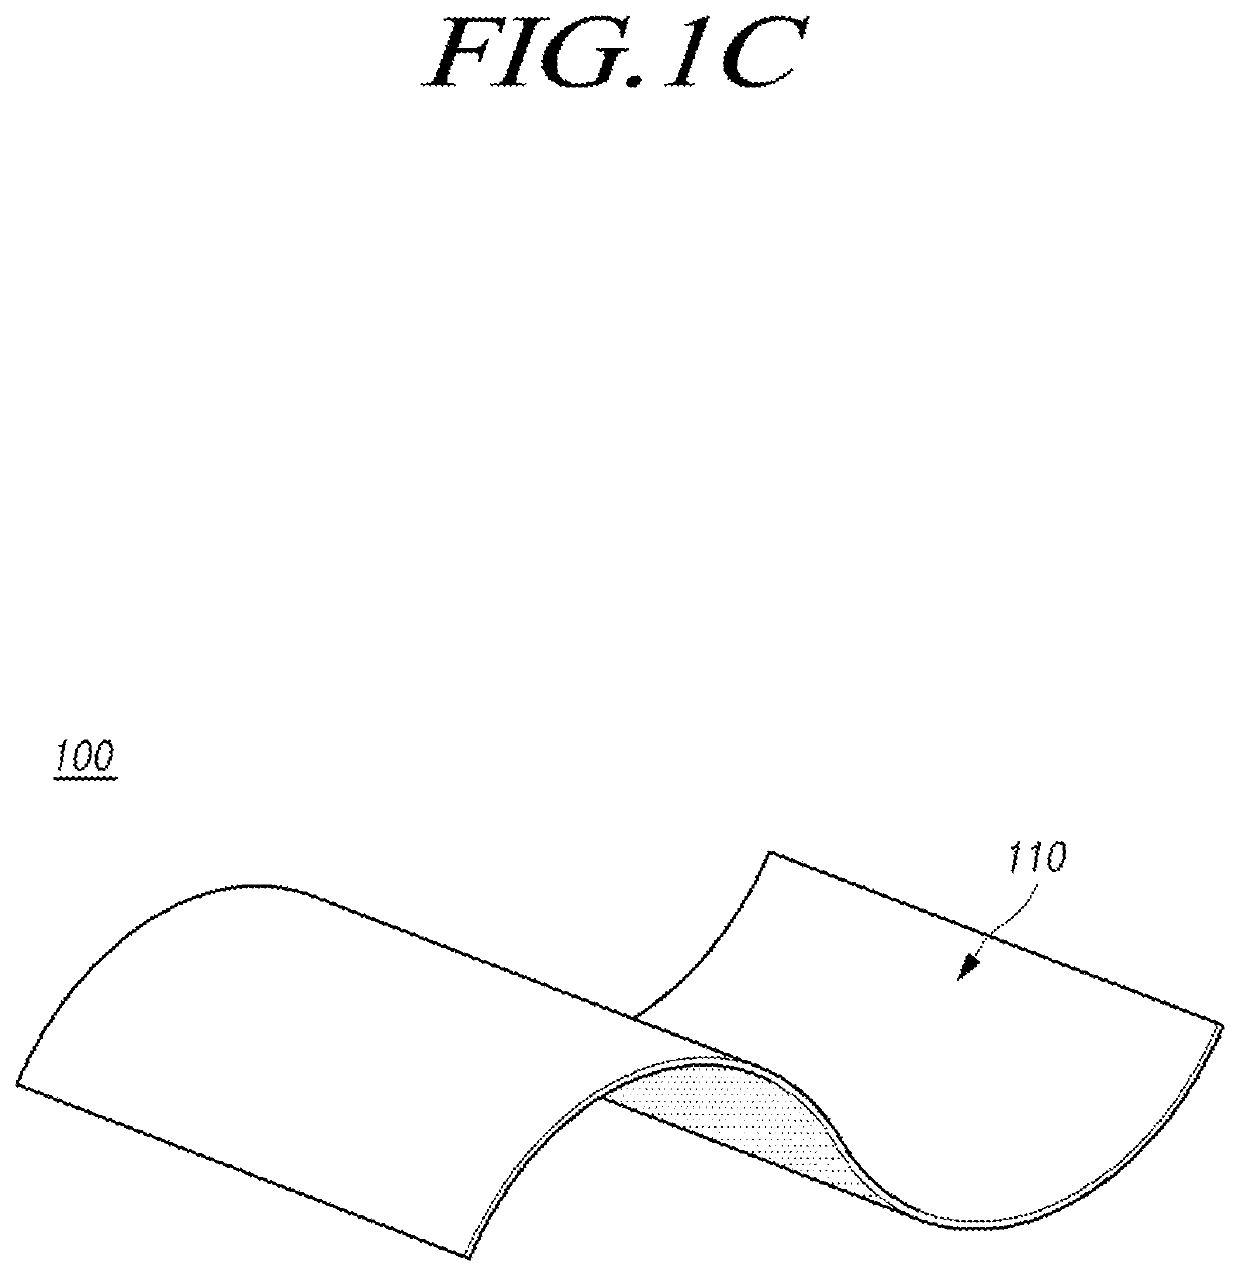 Flexible display apparatus having a well and a discontinuous region in an encapsulation layer